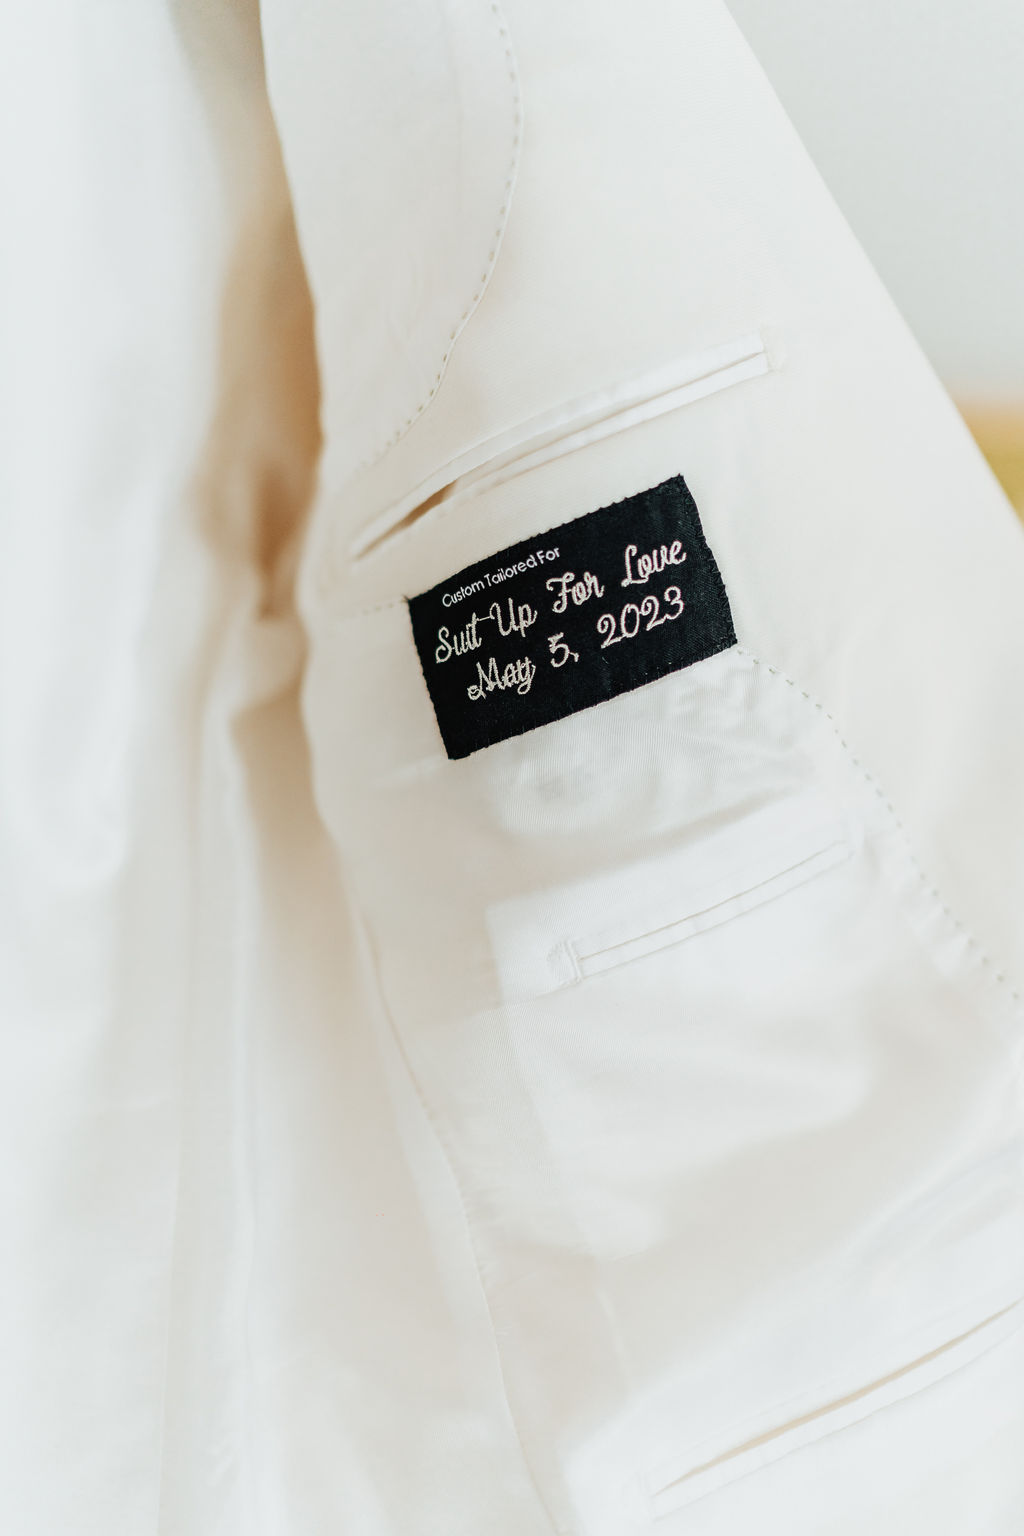 Inside of white suit jacket with embroidery "Suit up for Love, May 5, 2023."